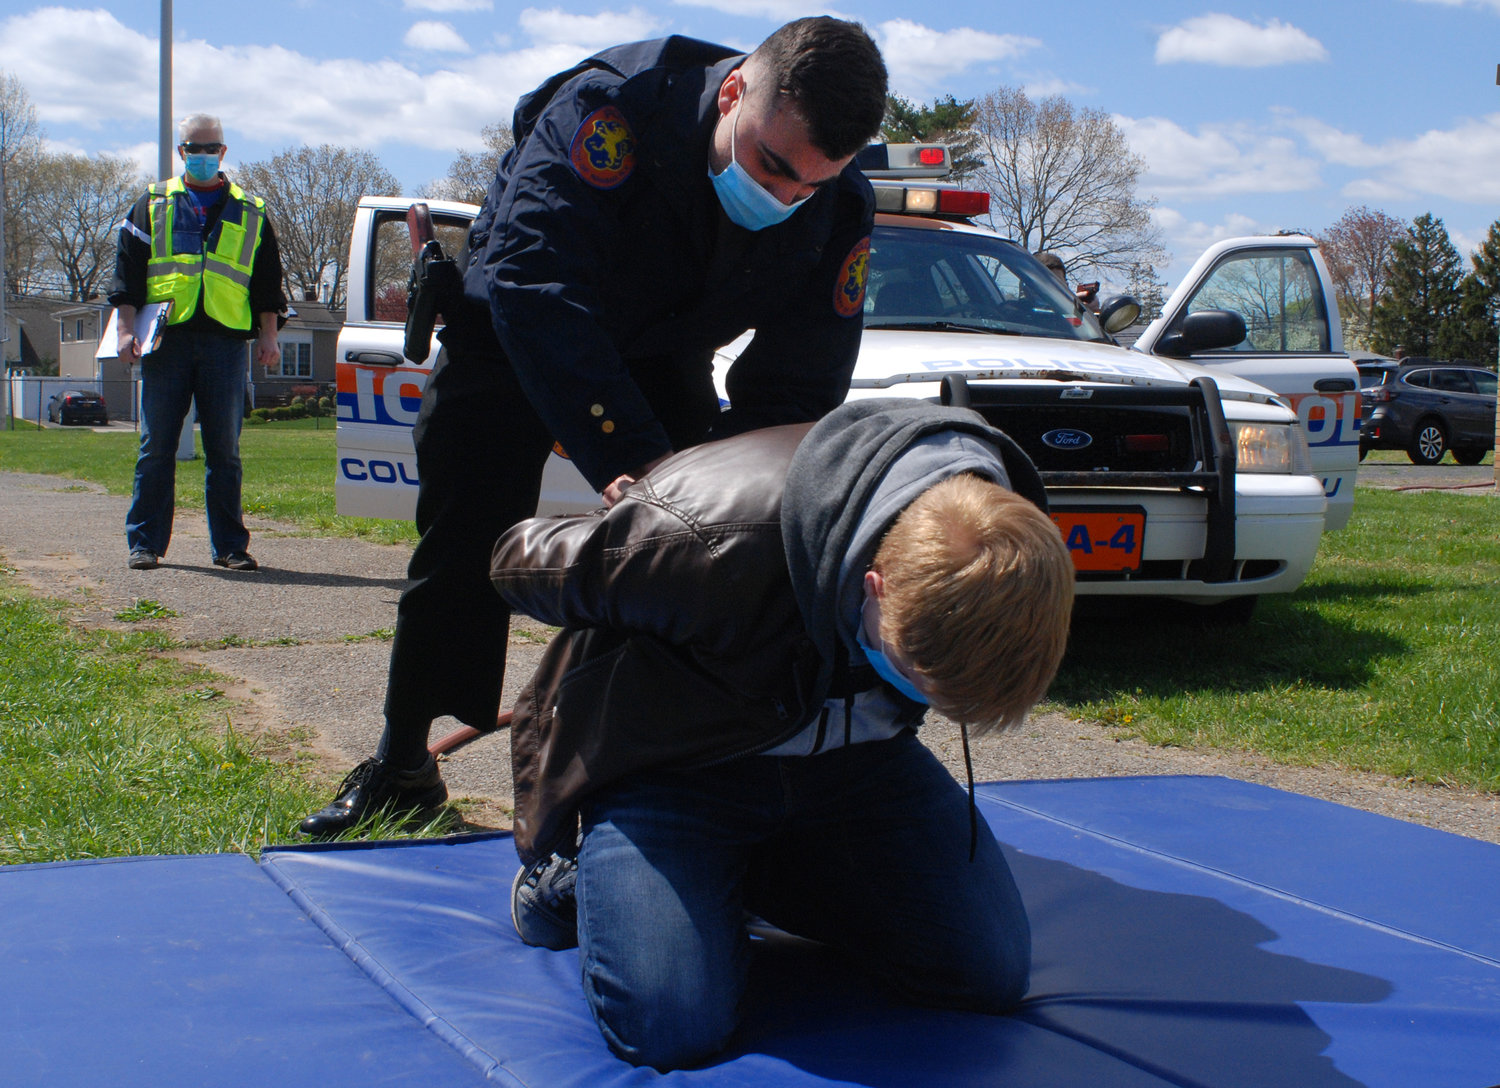 A recruit practiced placing handcuffs on a suspect, who was played by an actual police officer for this exercise.